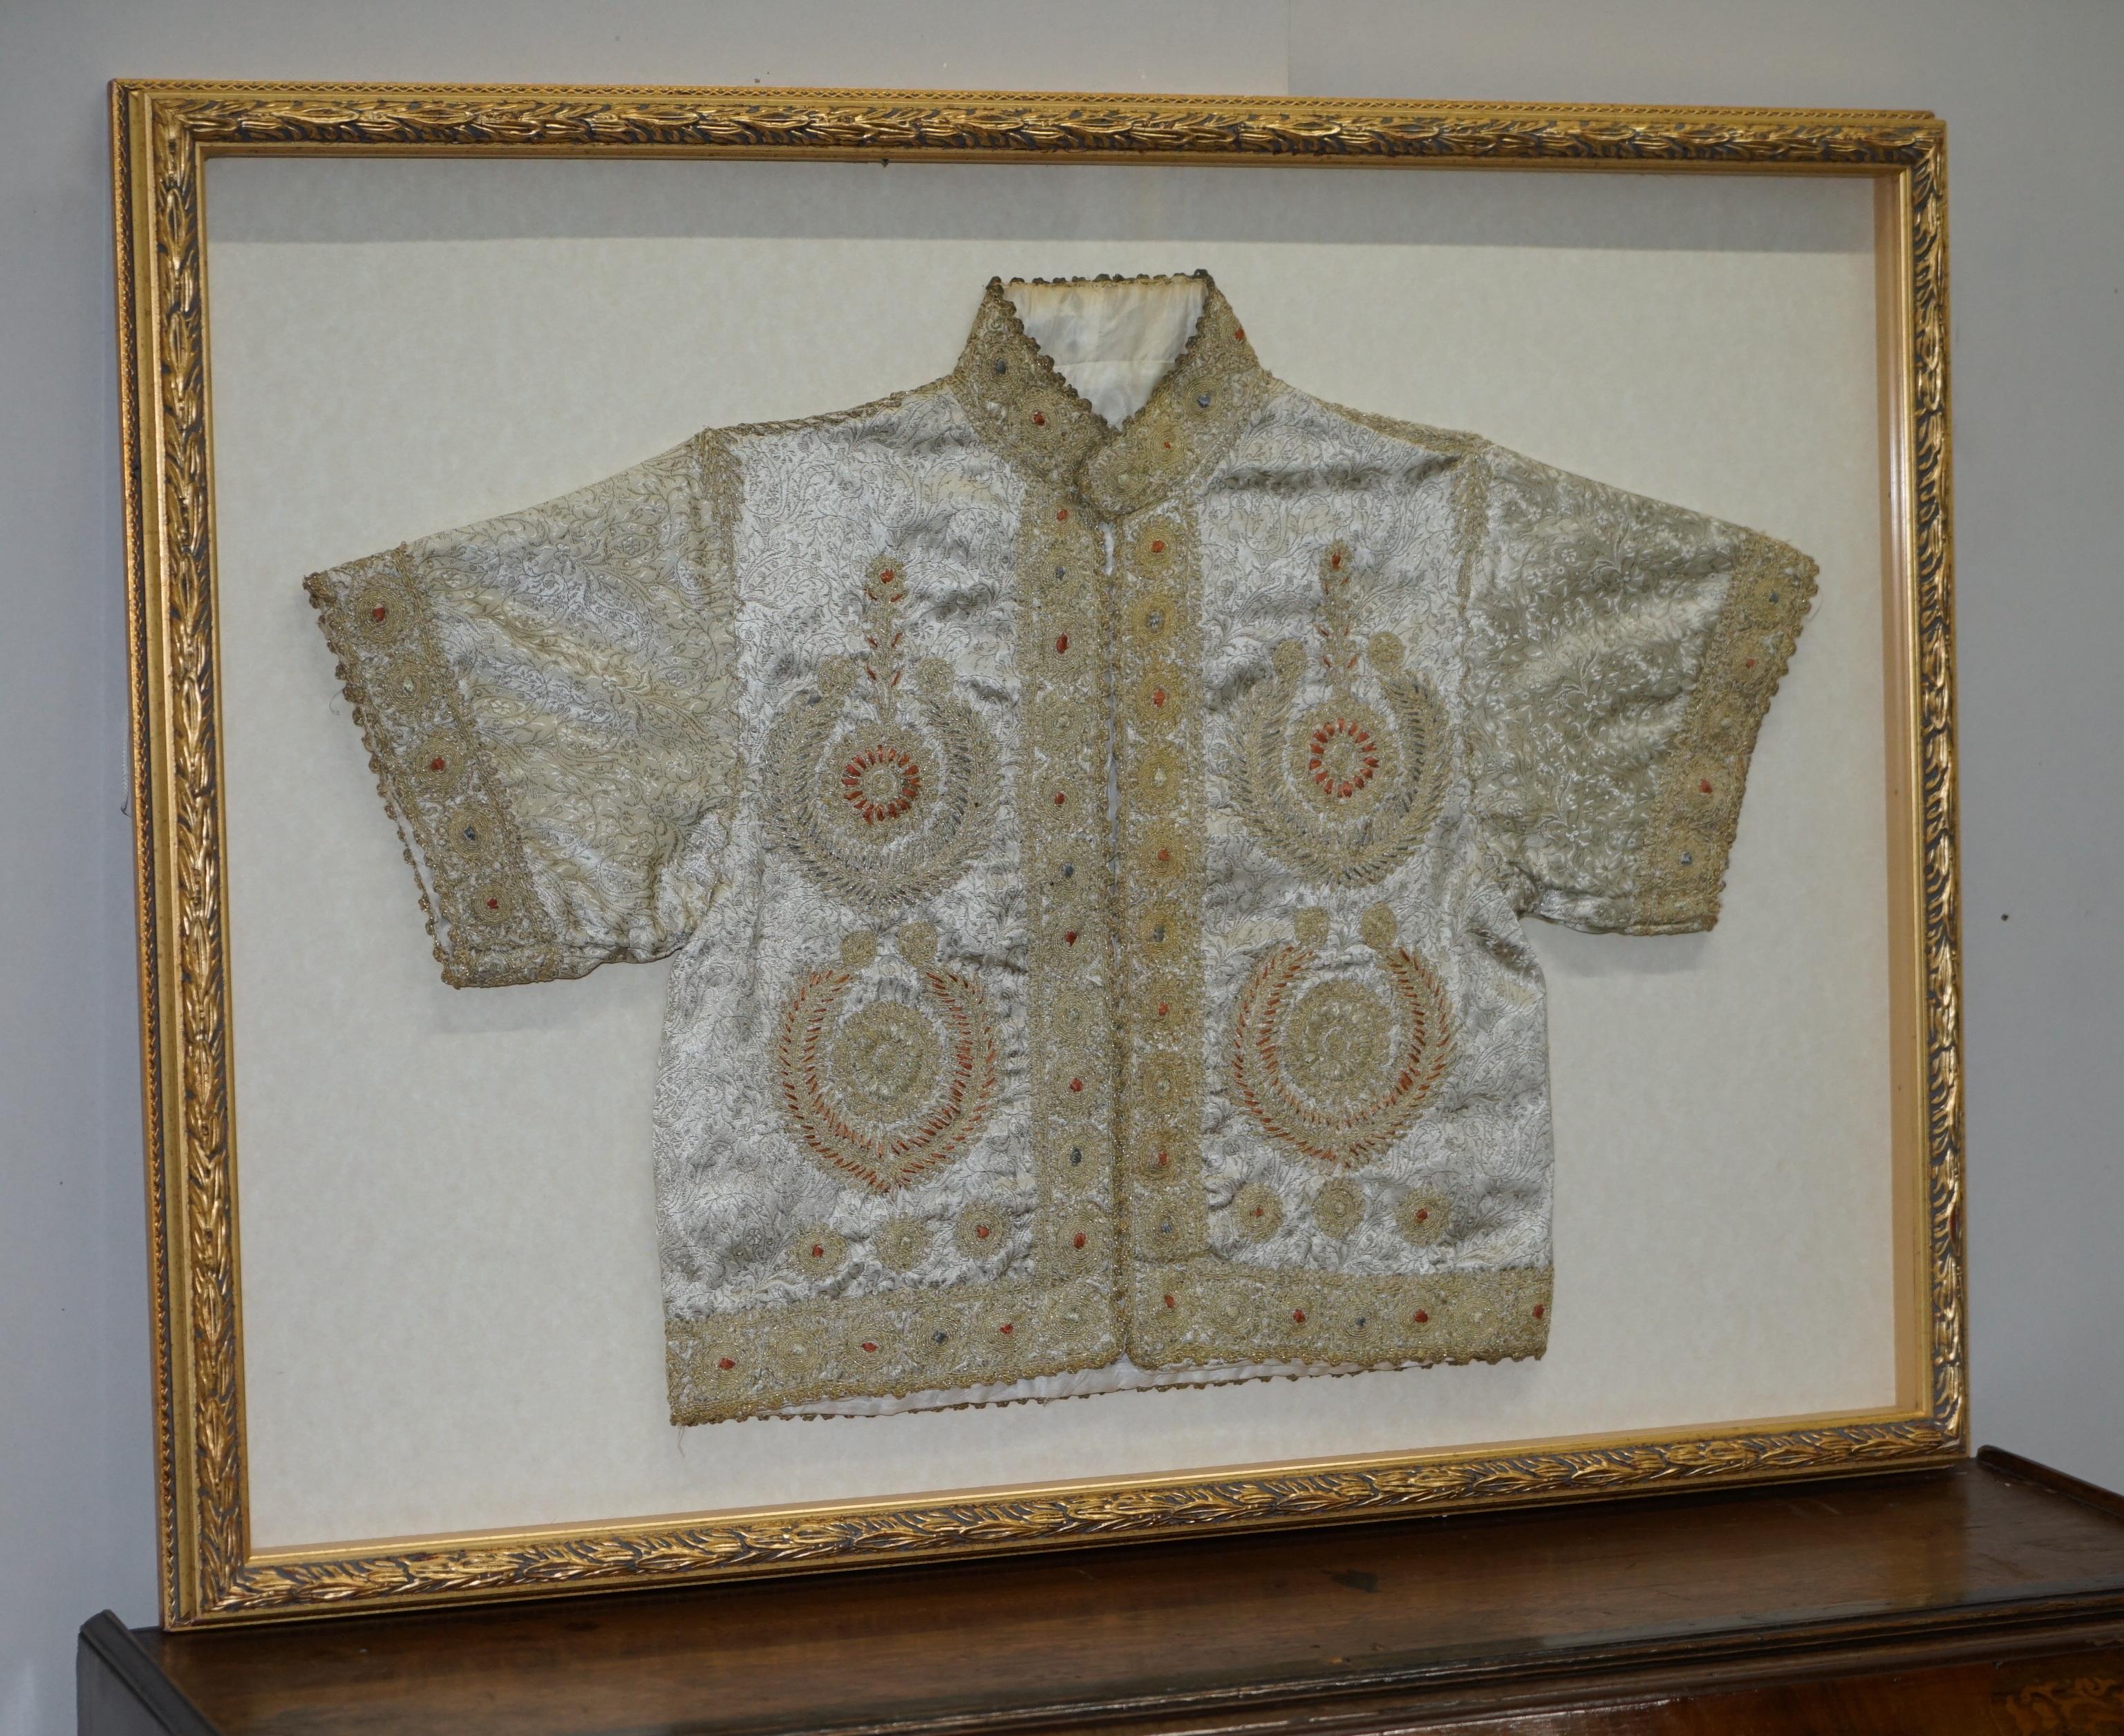 We are delighted to offer this very rare 19th century Chinese silk embroidered ceremonial robe in a lovely glass picture frame display case

An extremely decorative piece, the quality and craftsmanship is second to none. This piece was clearly